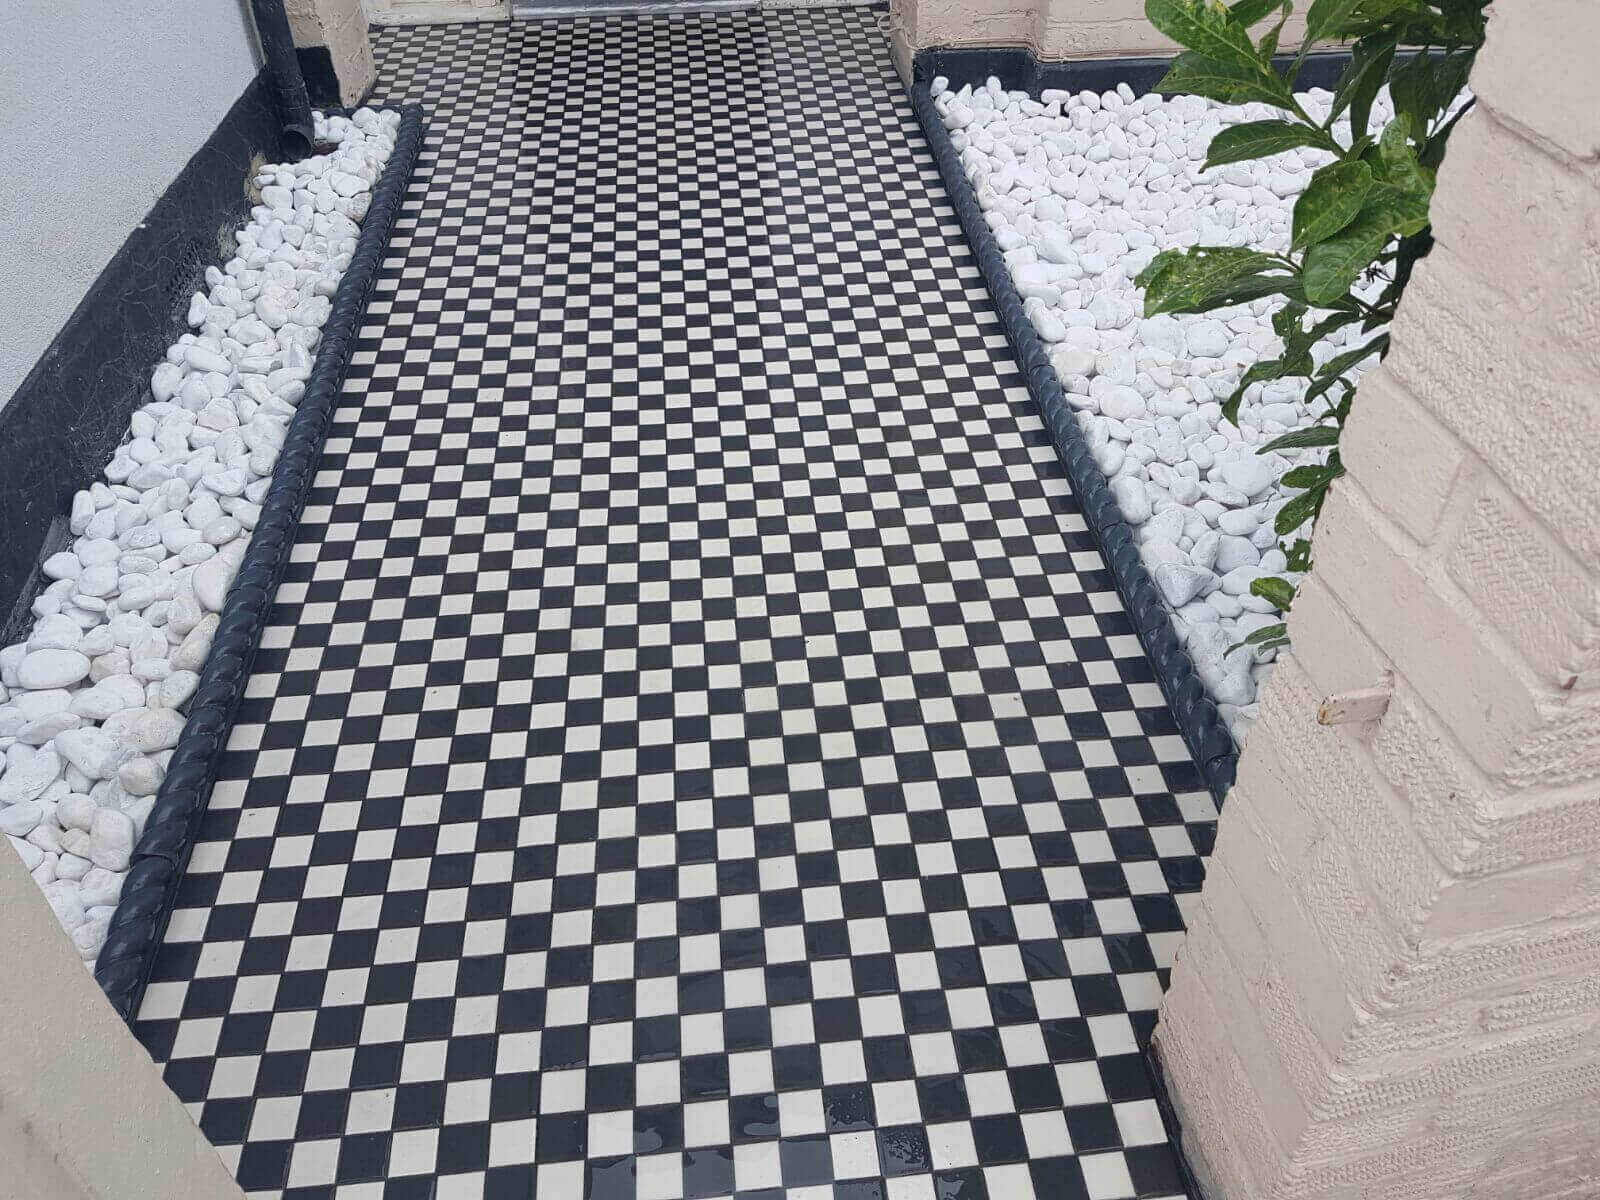  Victorian Pathway Tile Installation Contractor Chipstead, Surrey CR5